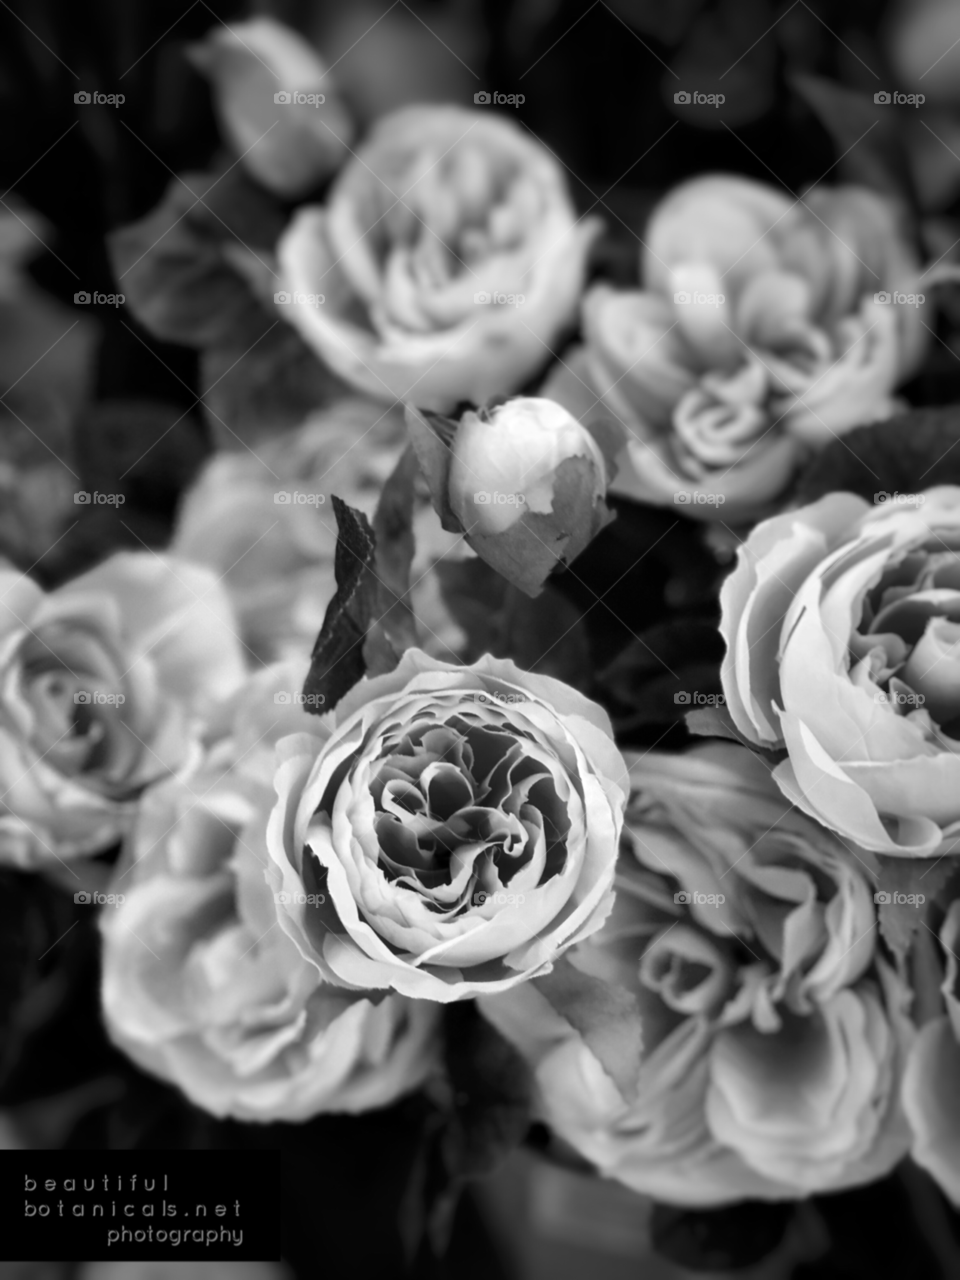 Stunning Black and White Floral. Beautiful Botanicals for Canvas, And Wall Art! 